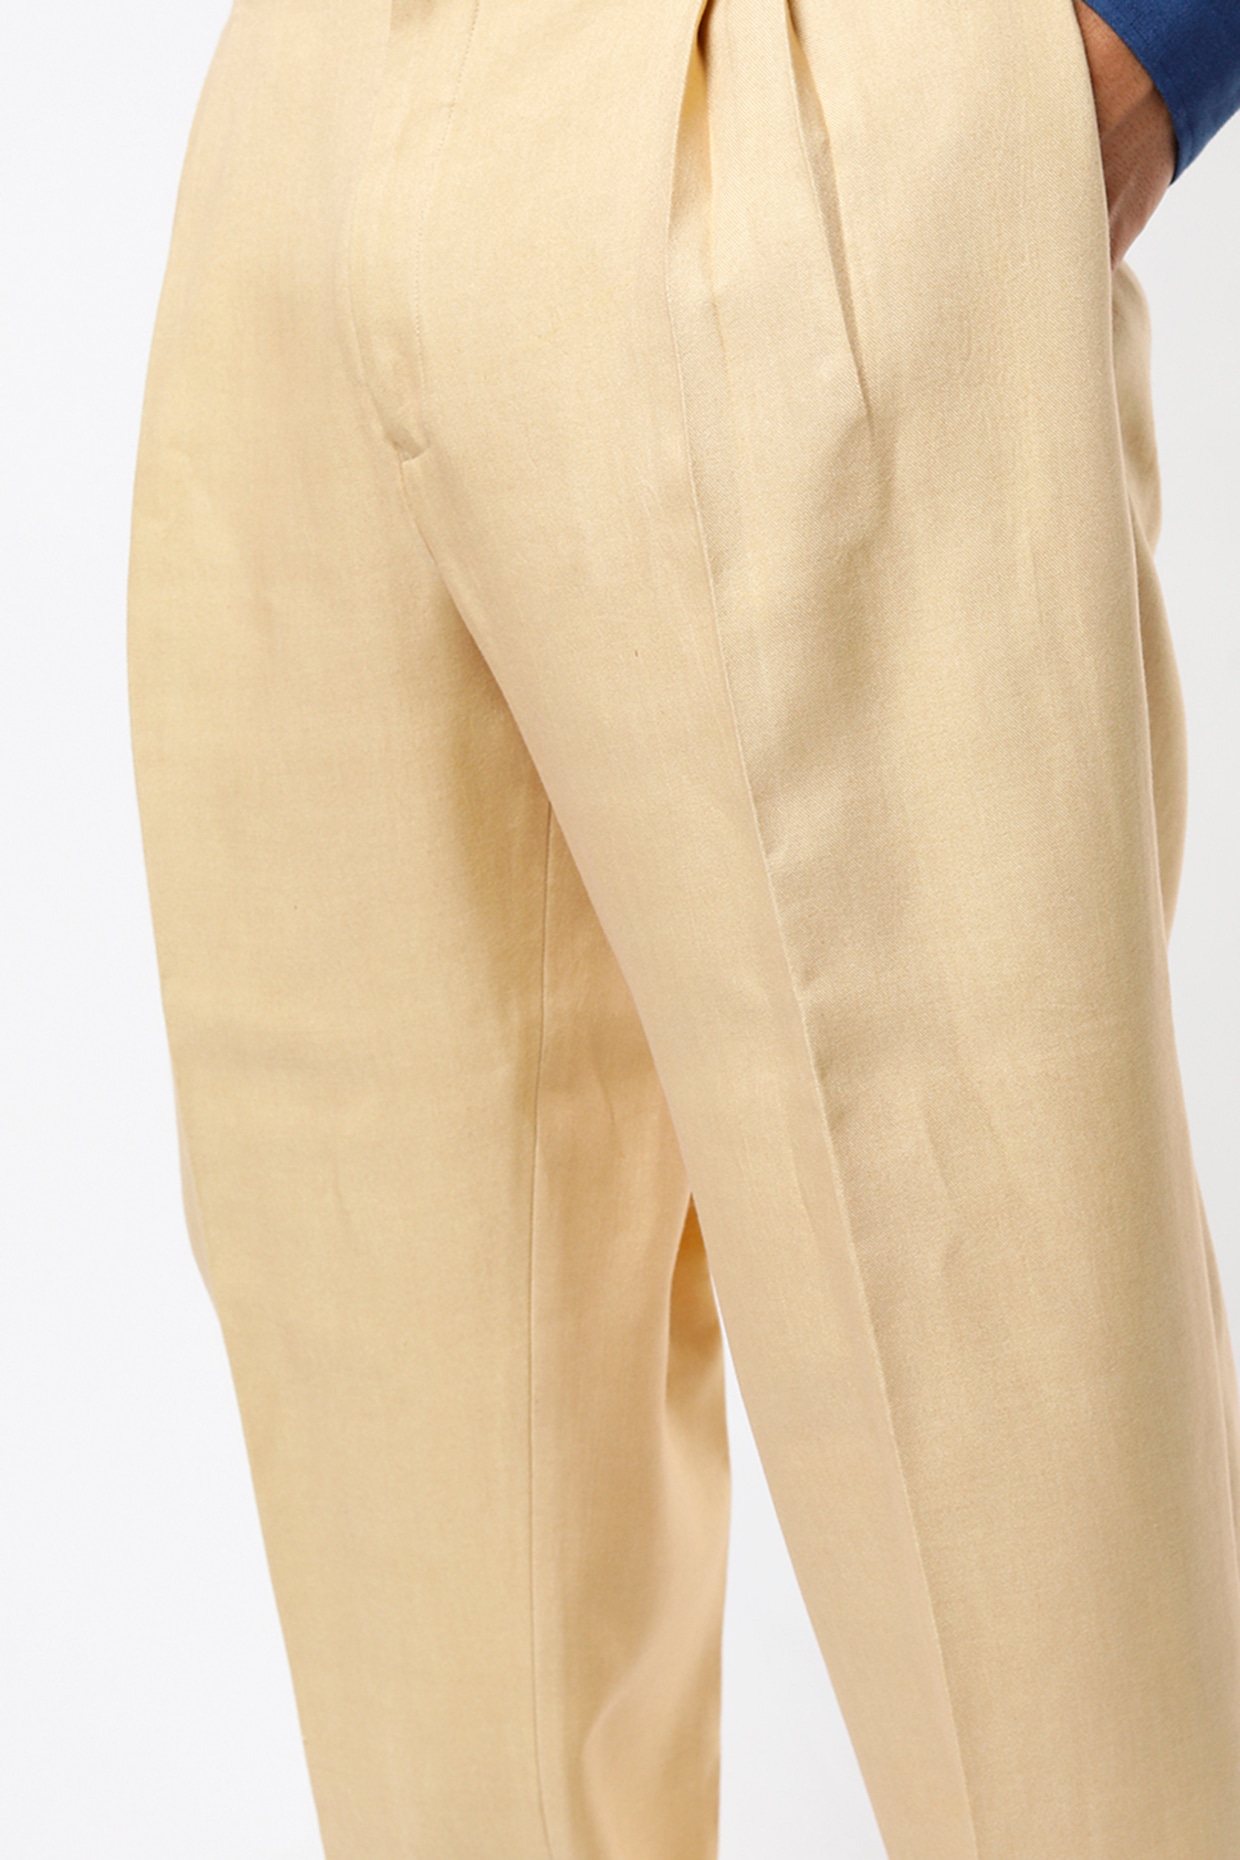 Cotton Twill Pants - Our Second Nature